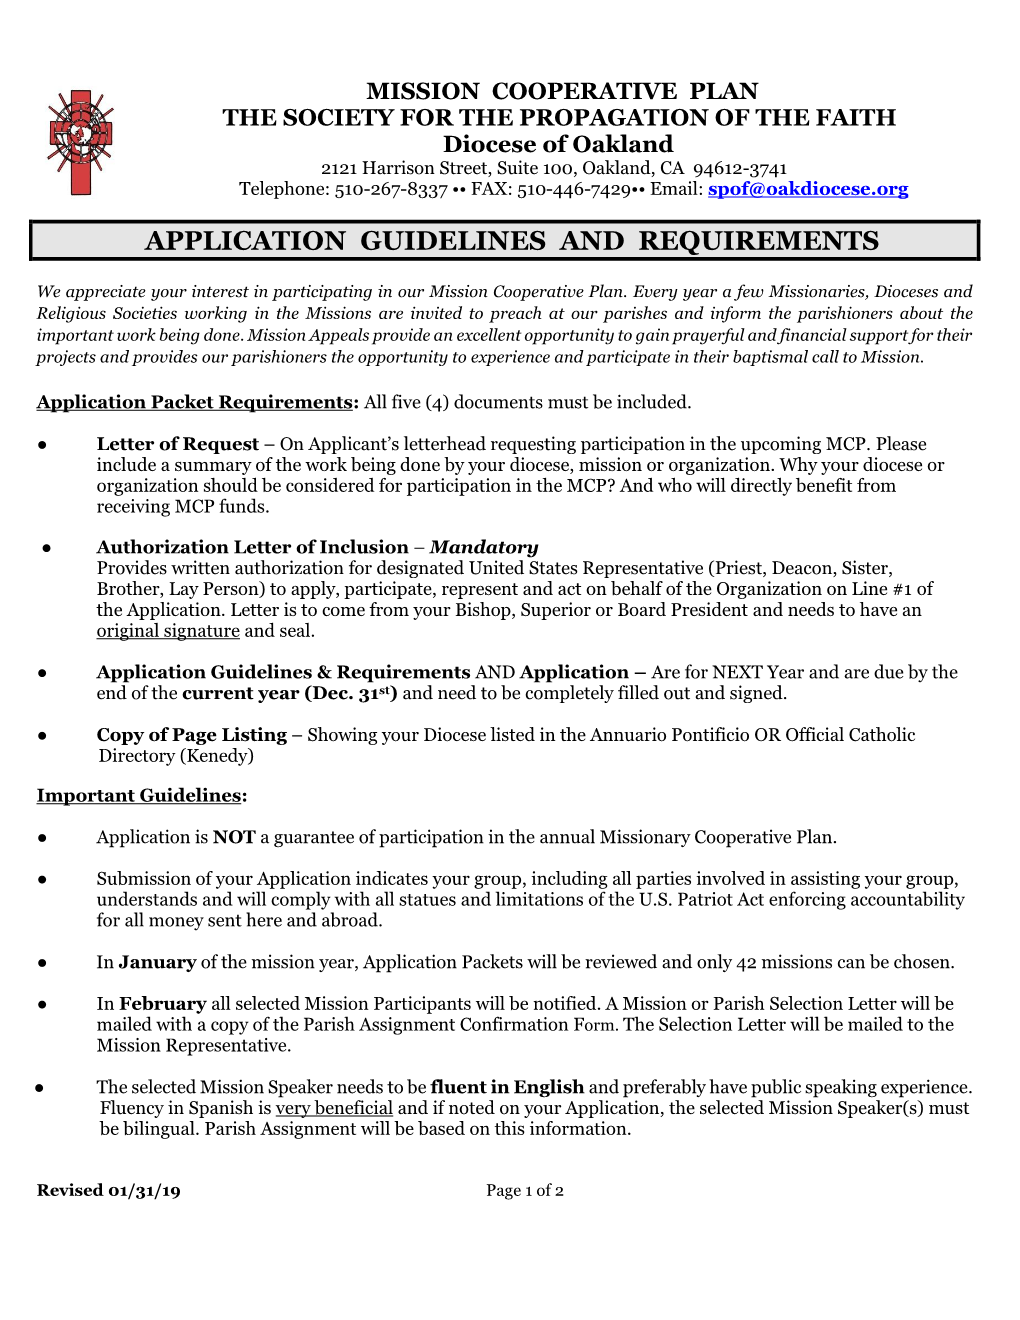 Application Guidelines and Requirements